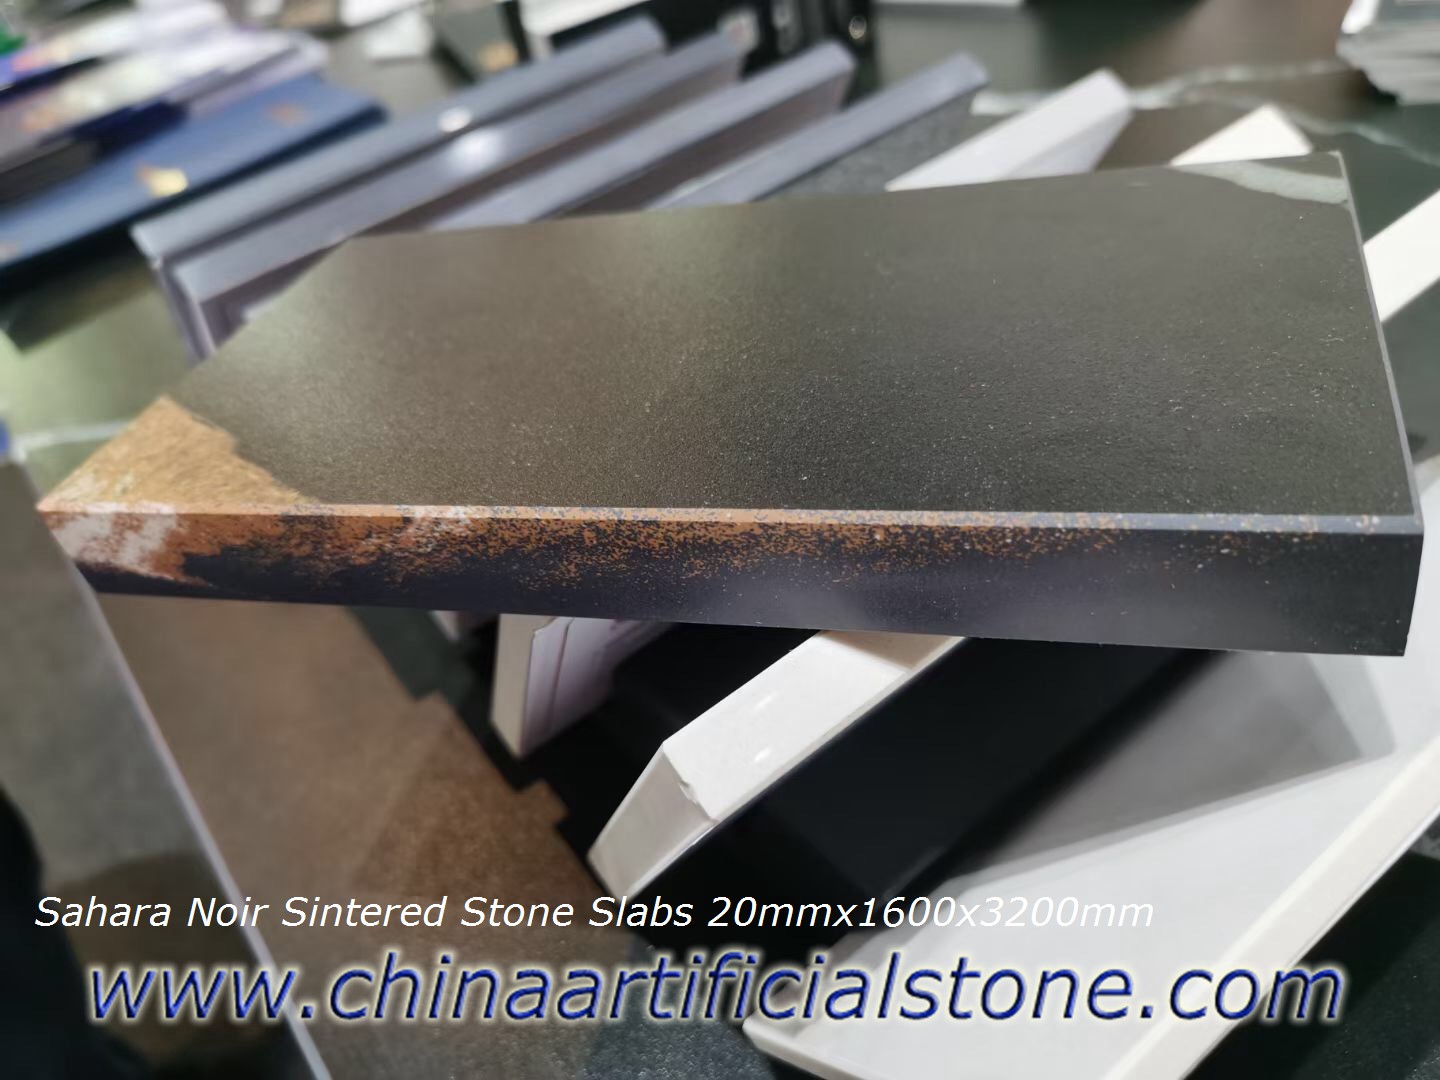 20mm Sintered Stone Marble Slabs 1600x3200mm 